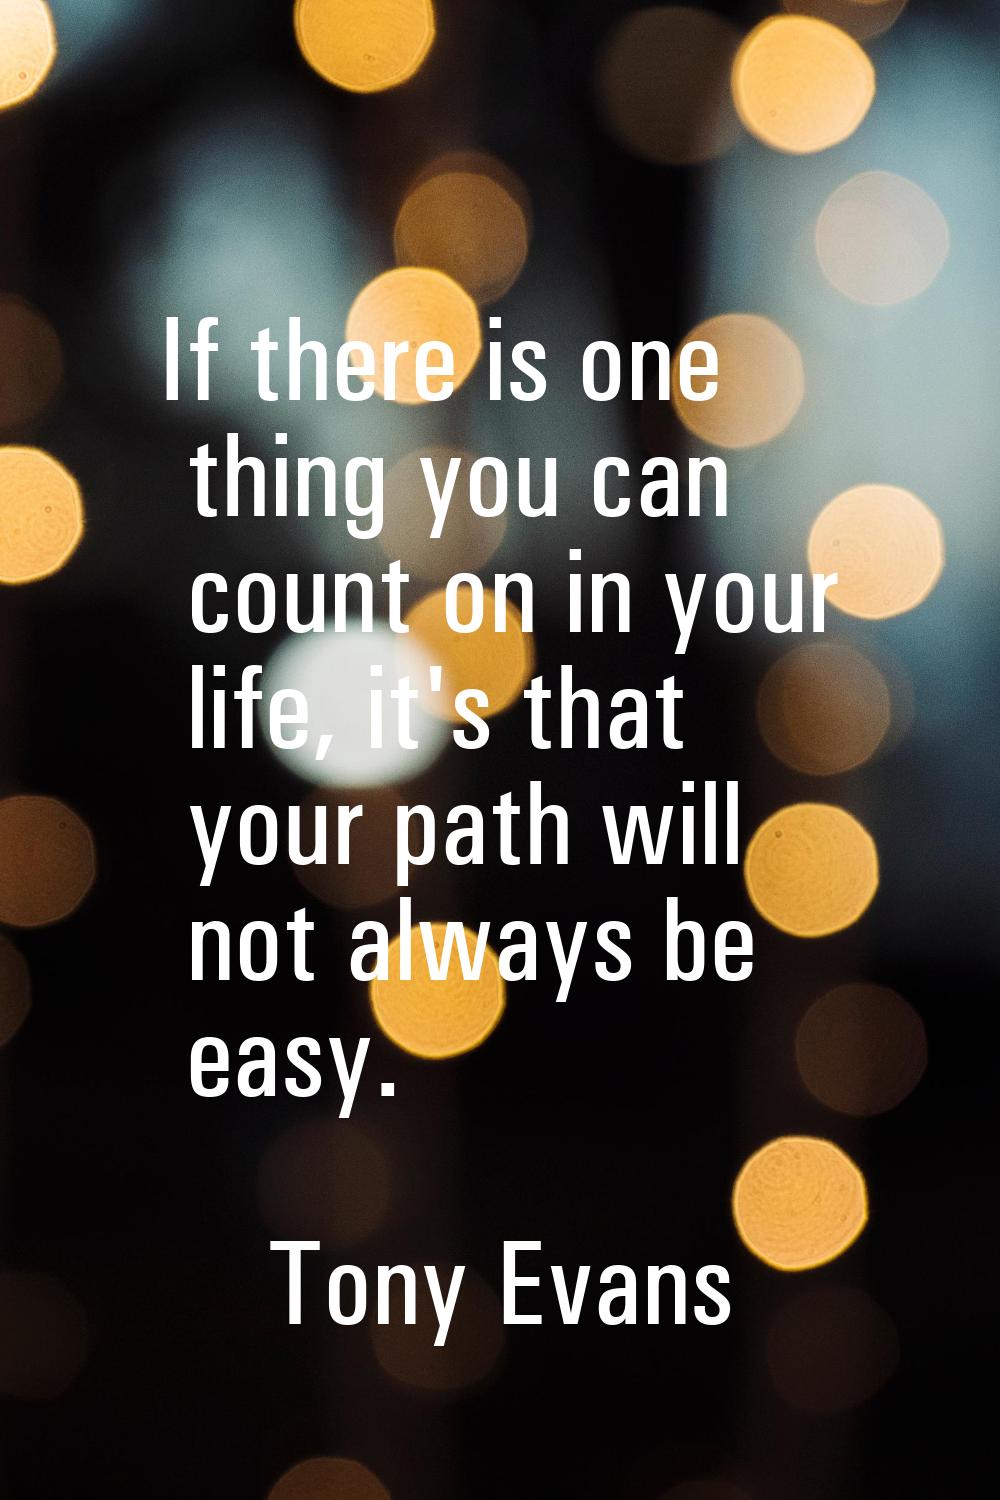 If there is one thing you can count on in your life, it's that your path will not always be easy.